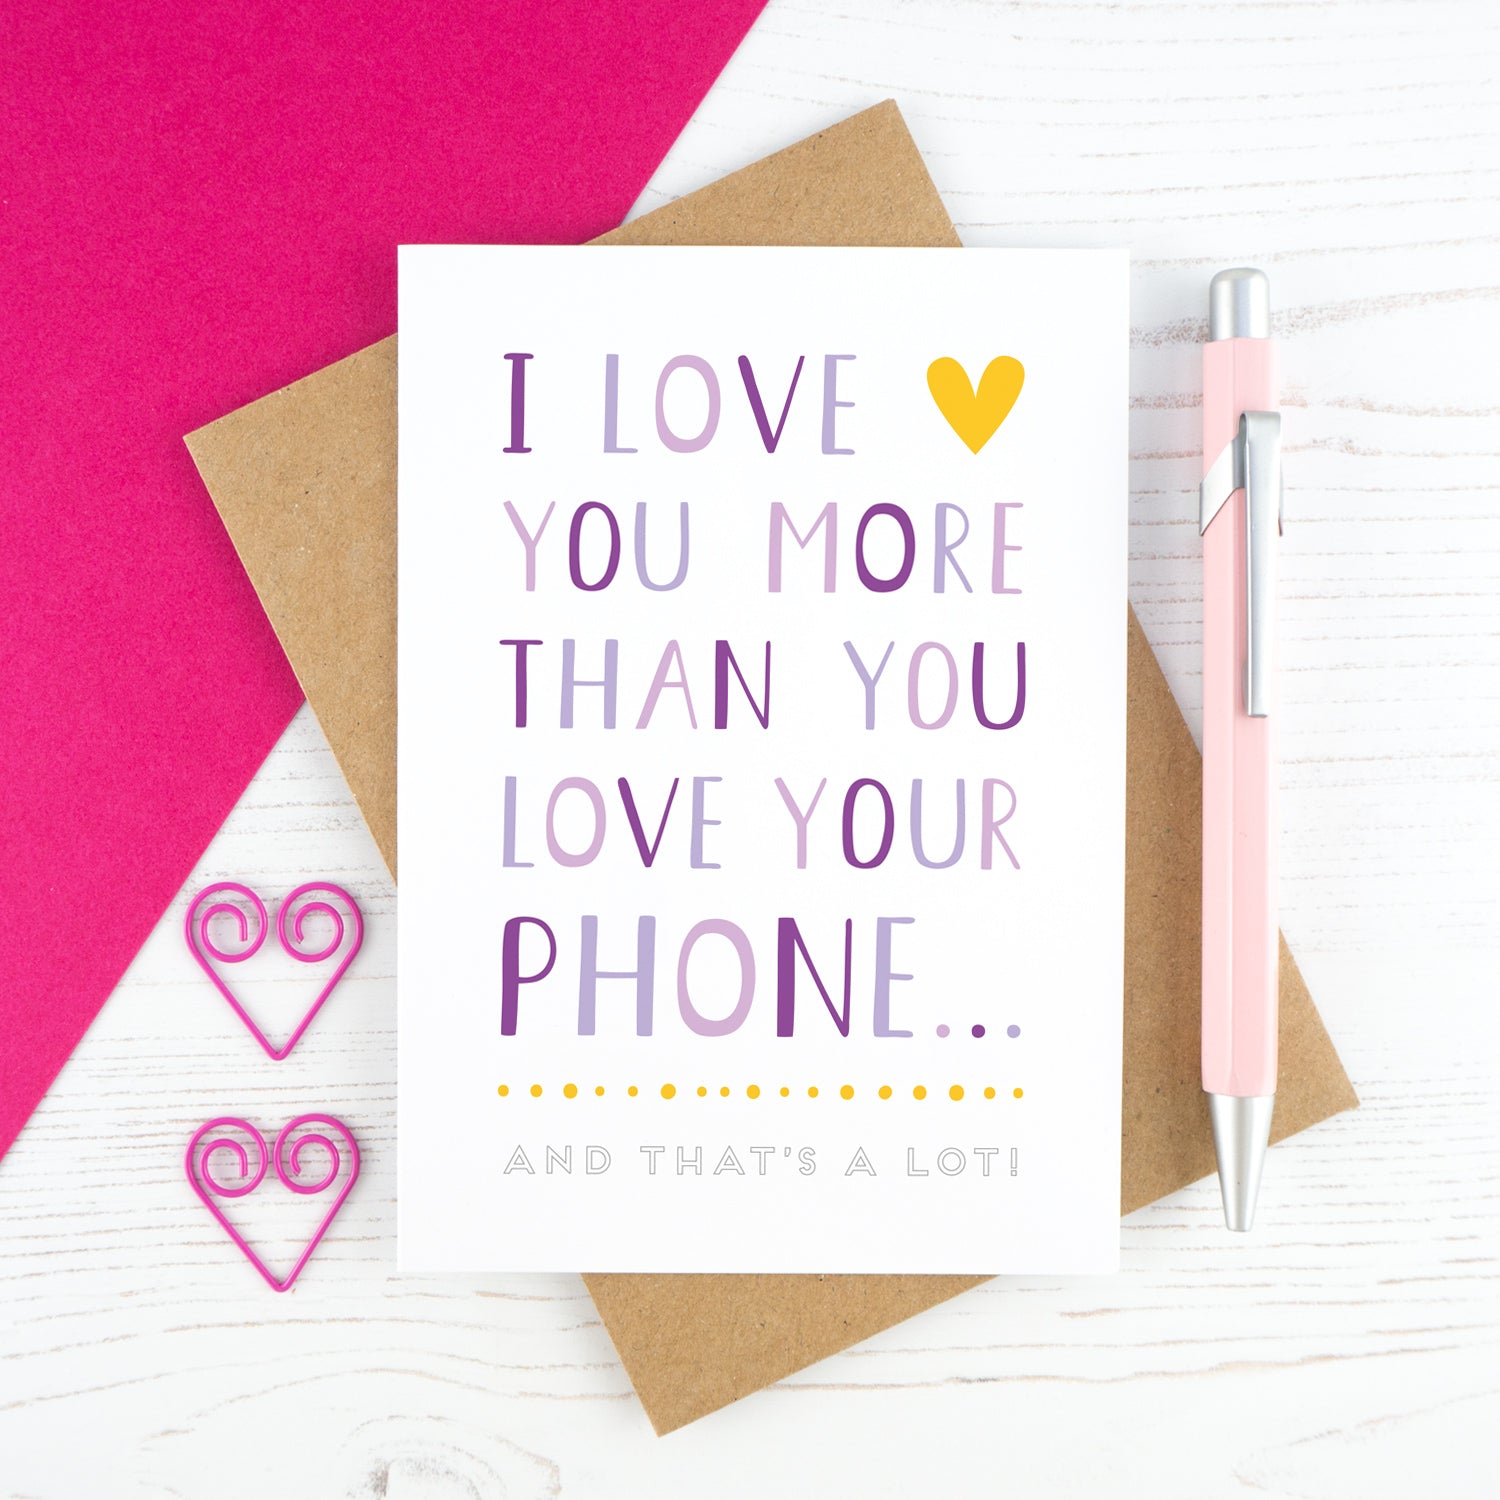 I love you more than you love your phone card - purple